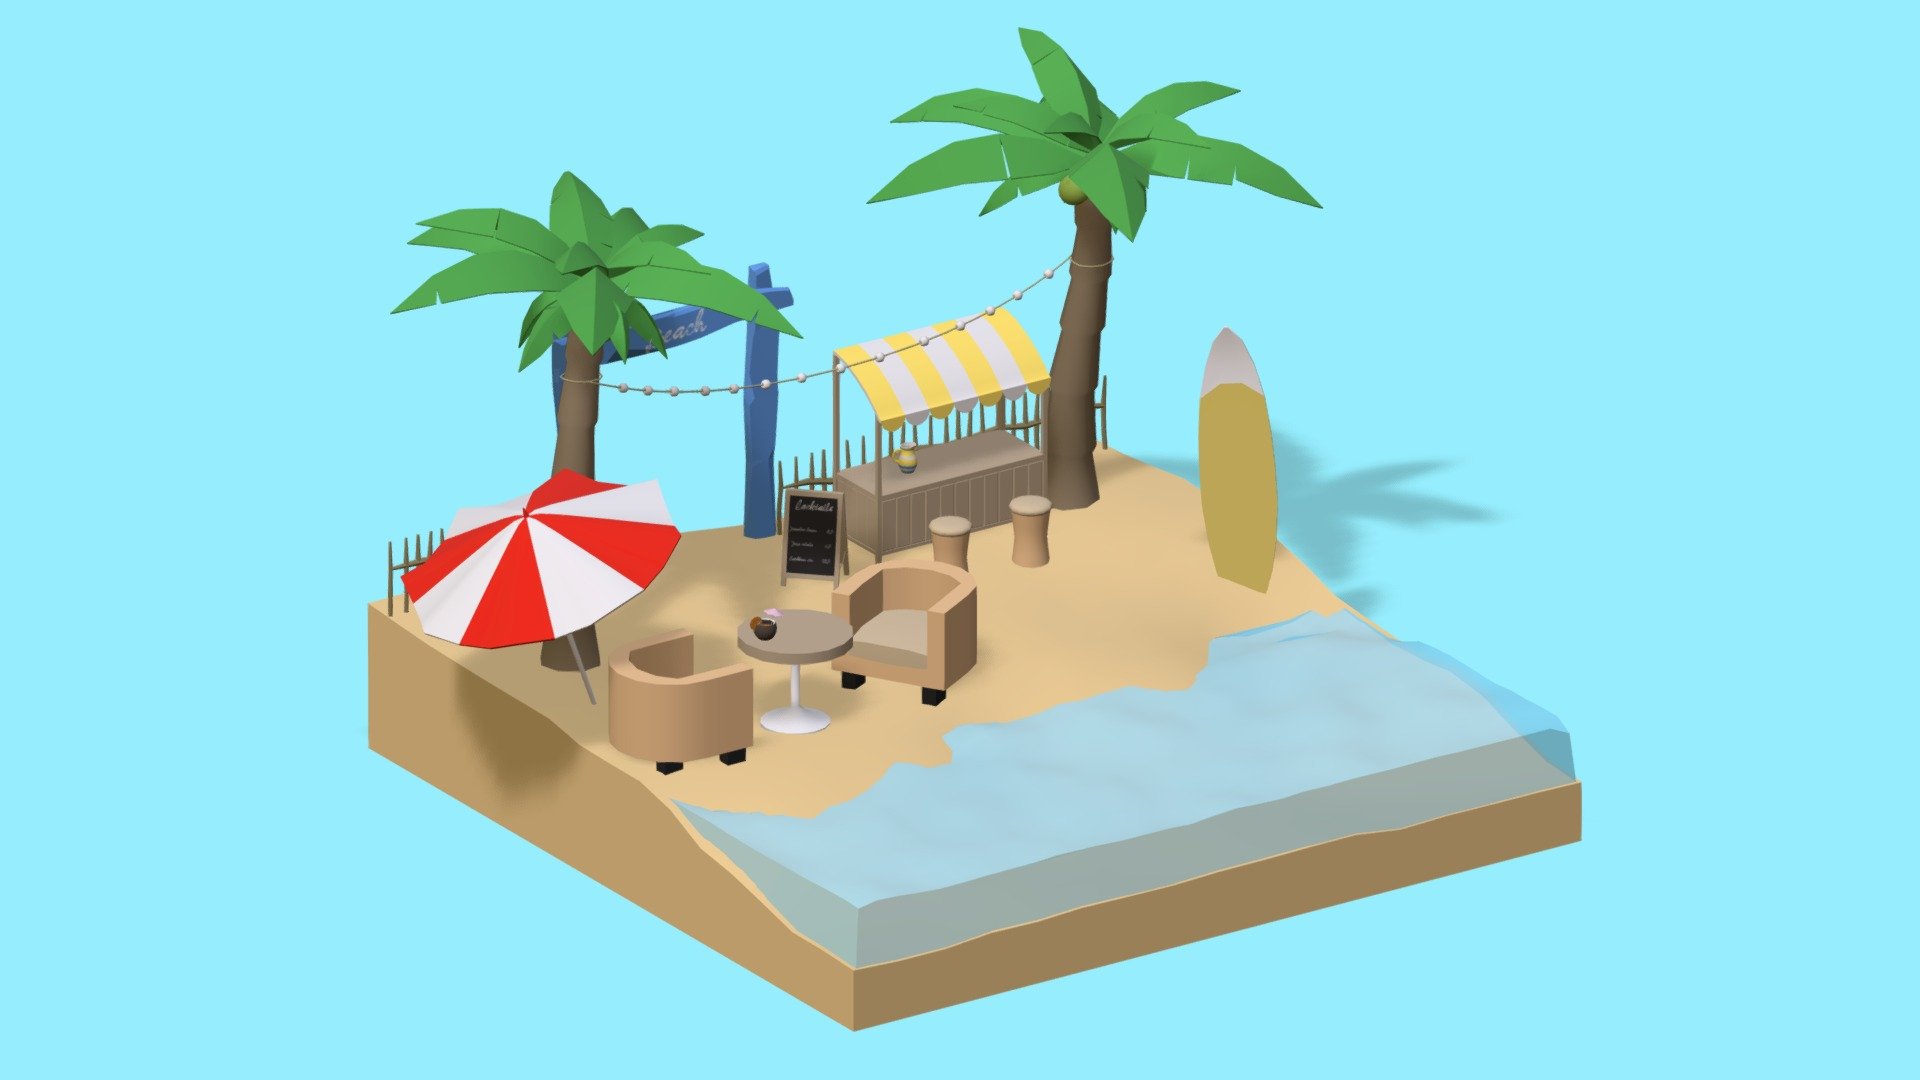 Hi everyone !

I am pleased to present to you this super heavenly corner by the sea in a relaxing atmosphere that will blend into any of your decorations in this style! You can integrate this mini scene in all your games or animations and create a unique decor of which only you have the secret! This pack contains:

A drink stand
A pitcher
Two rattan stools
A menu panel
A surf board
An arch
Barriers
Two rattan armchairs
Coconut palms
Coconuts
A table
A cocktail
An umbrella
A light garland
Sand
The sea ! In fact, everything you see in the images above.
// You can find the font used in this pack at this link: https://www.1001freefonts.com/bad-gong.font

Let your imagination take you! Enjoy ! - Beach - Buy Royalty Free 3D model by ApprenticeRaccoon 3d model